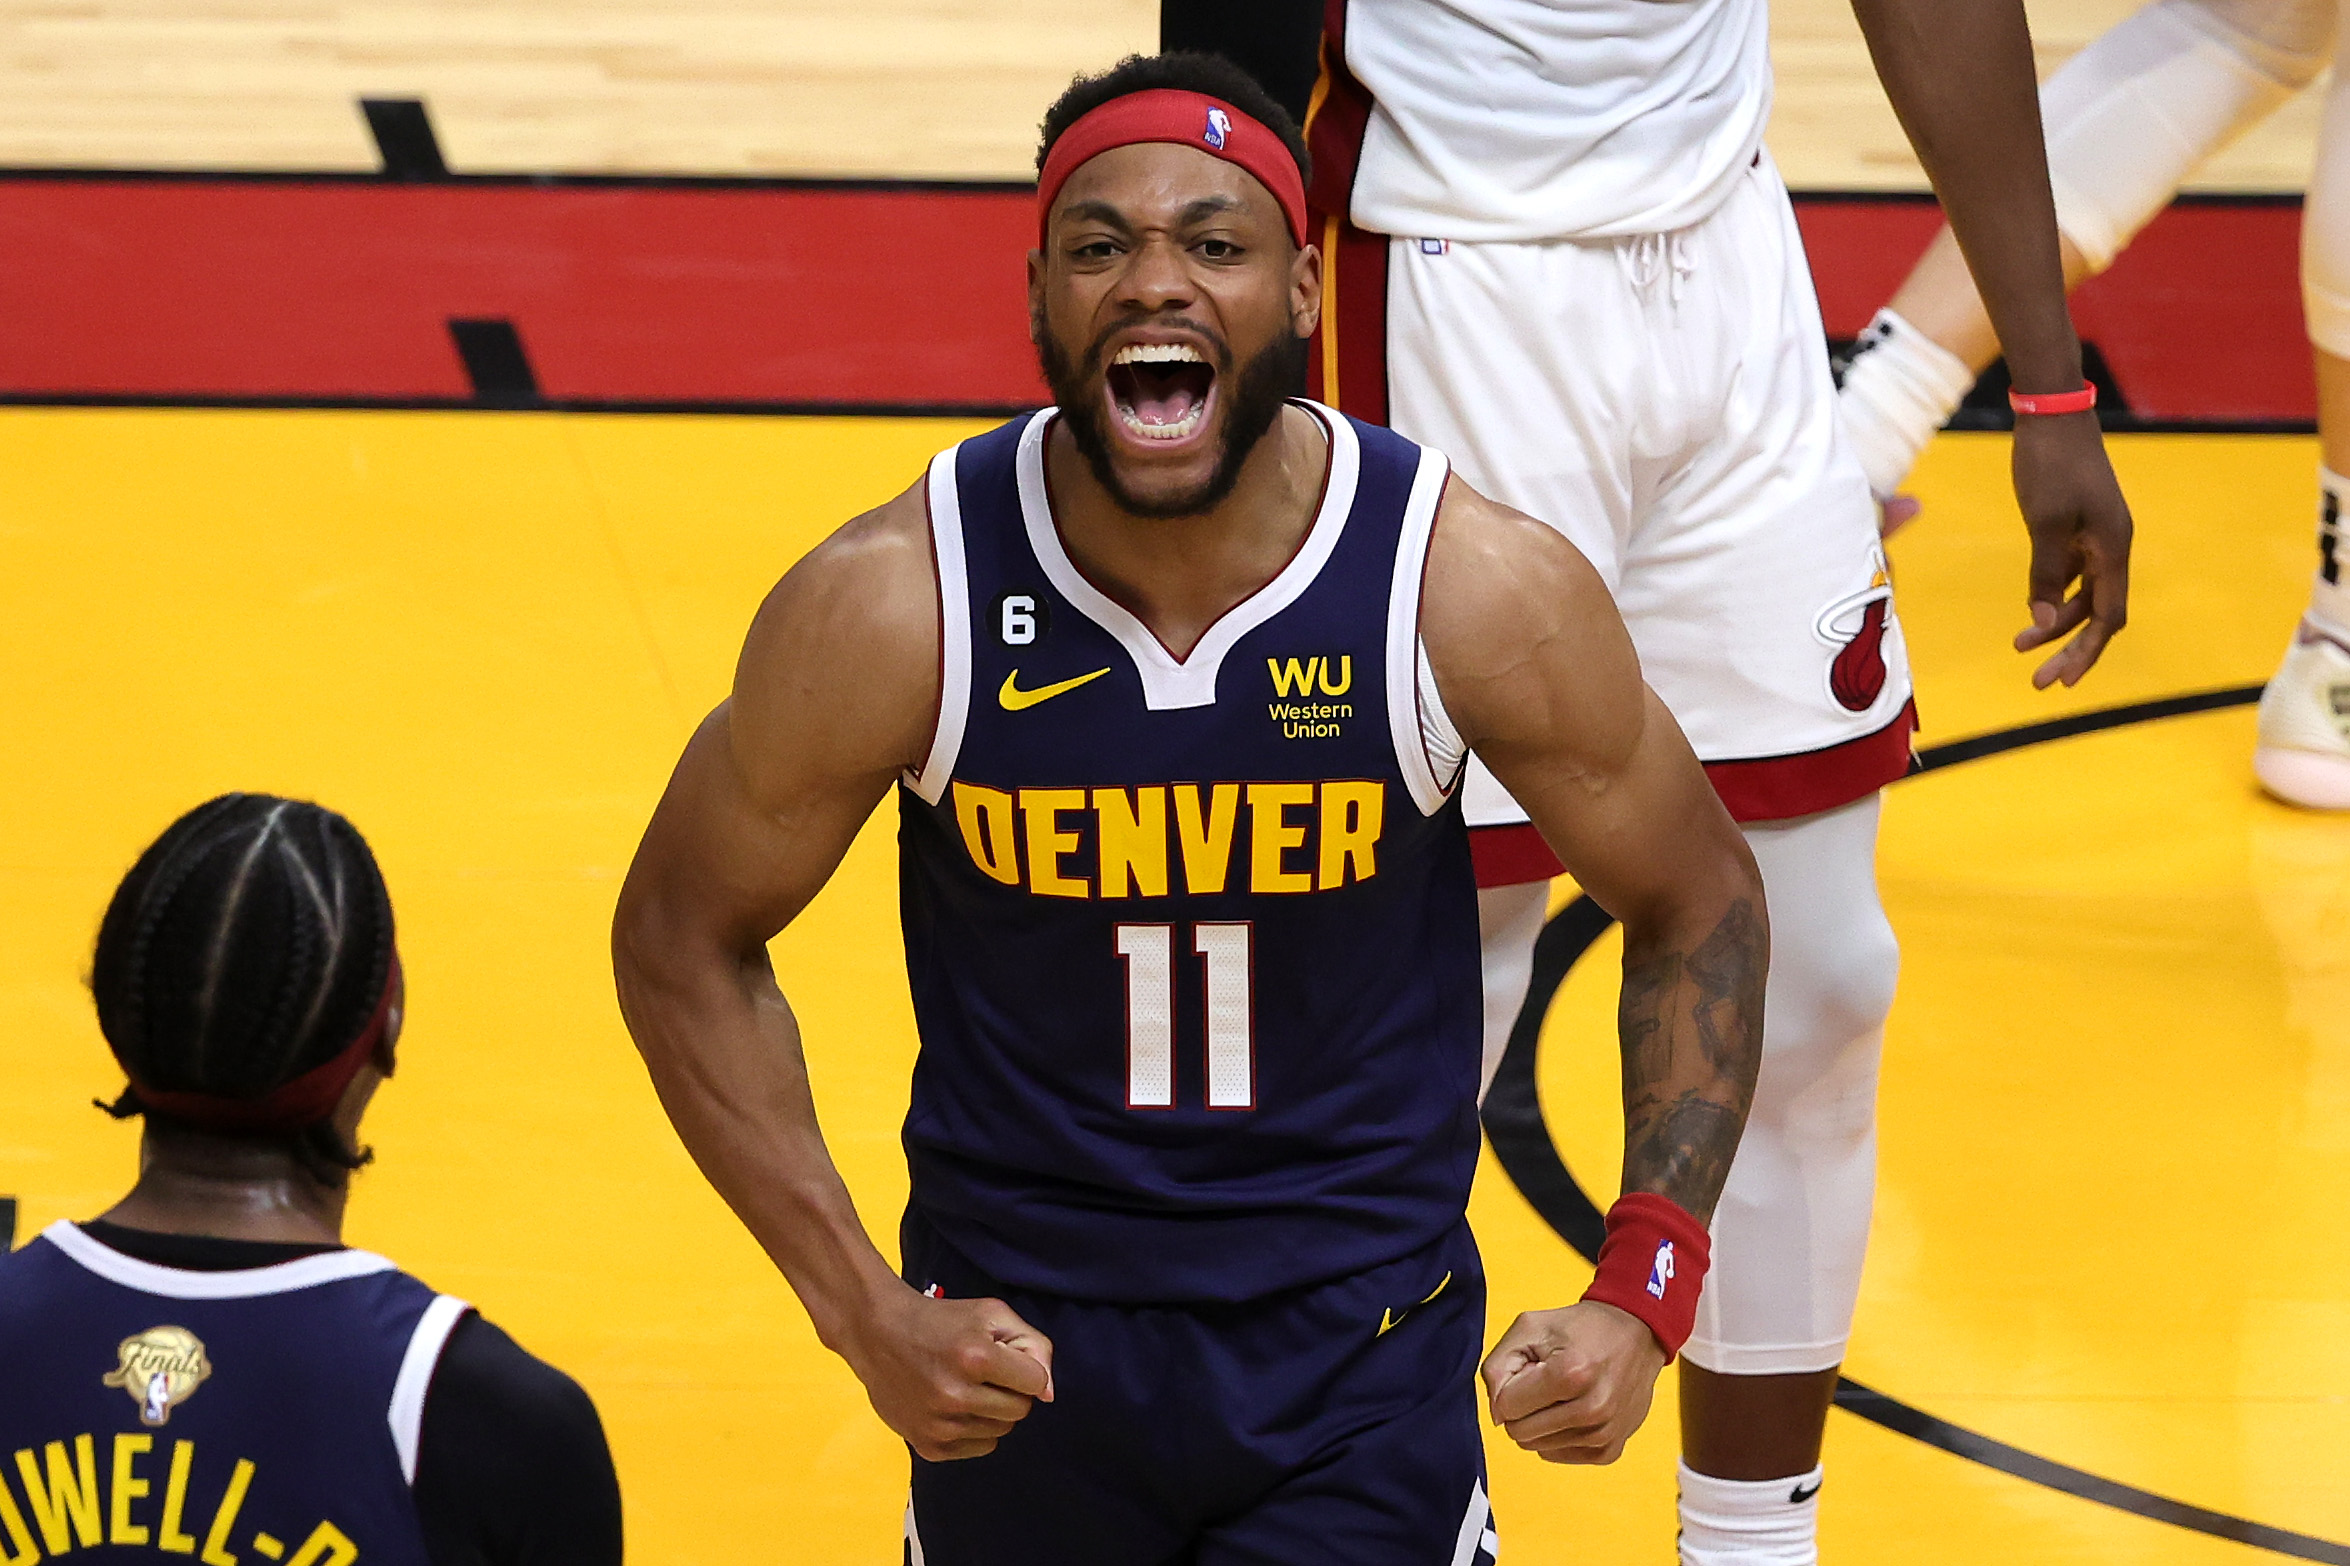 NBA Finals: Nuggets one win away from franchise's first title, take  commanding 3-1 lead over Heat